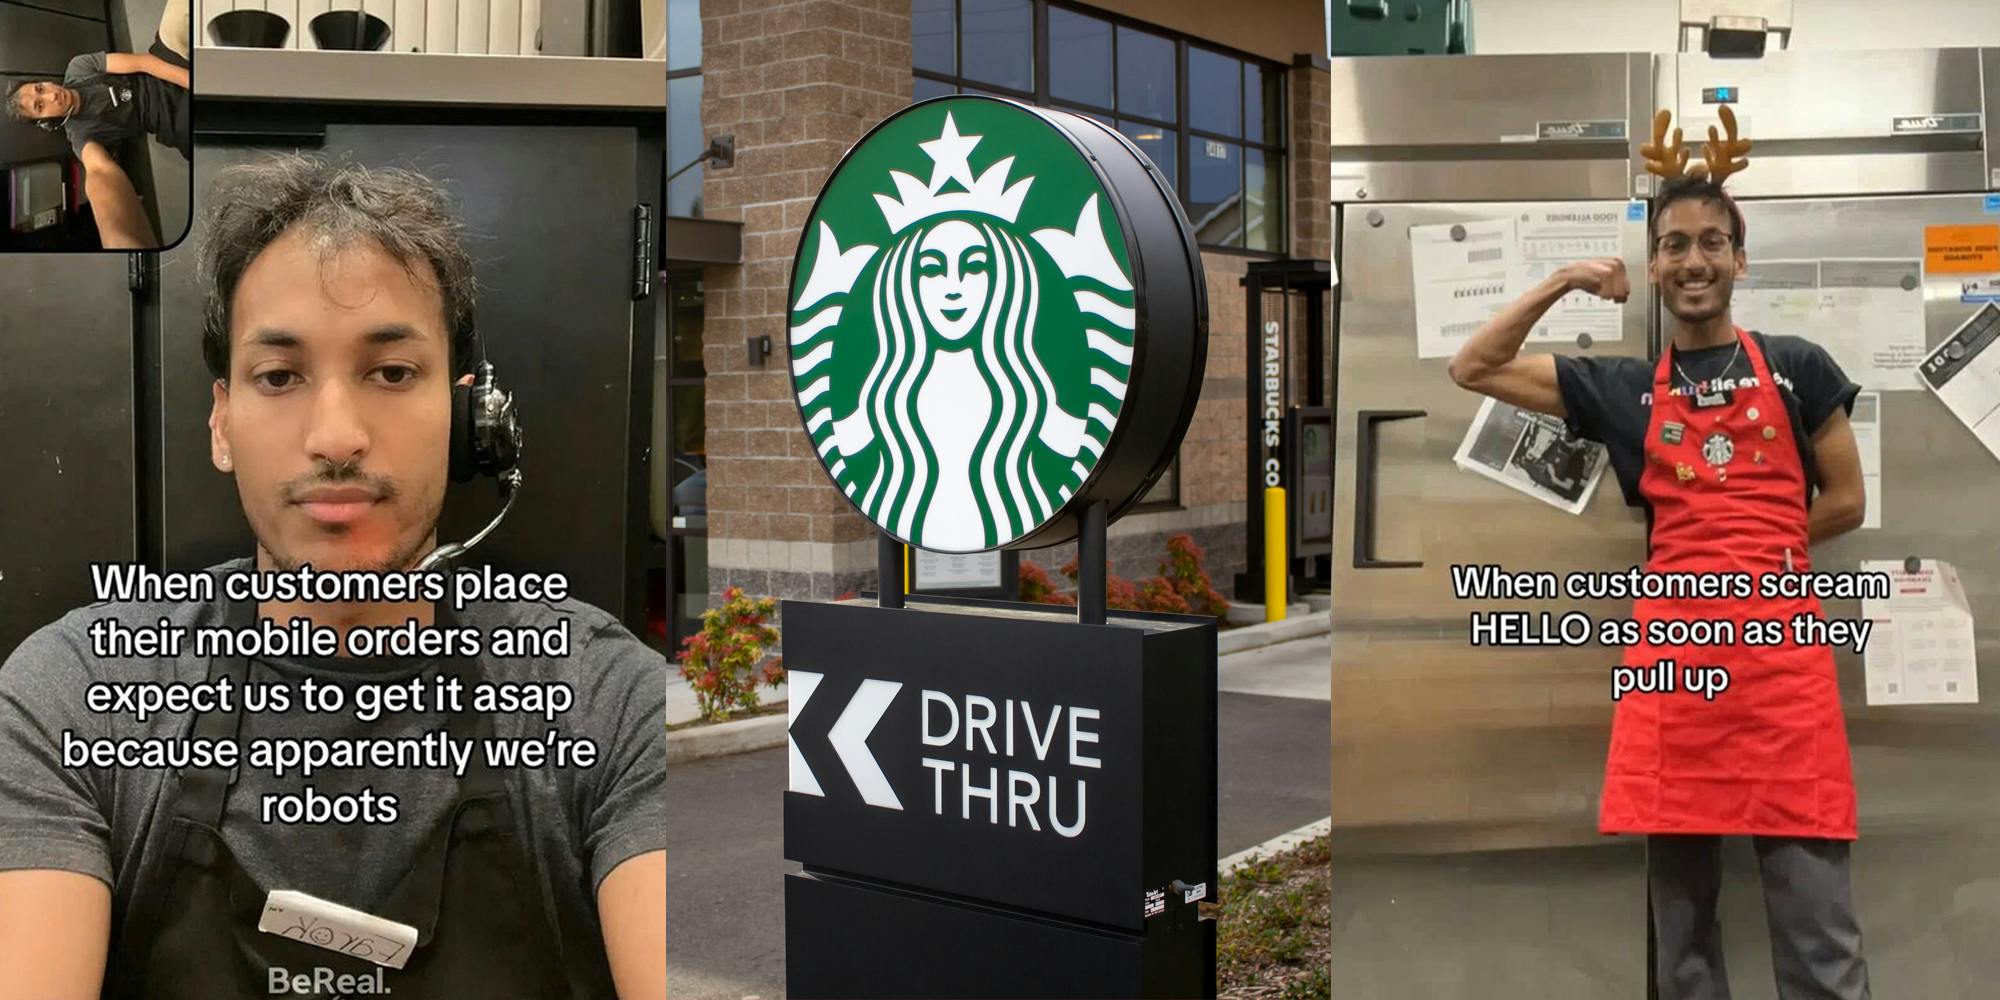 Starbucks barista with caption "When customers place their mobile orders and expect us to get it asap because apparently we're robots" (l) Starbucks drive thru sign in front of building (c) Starbucks barista with caption "When customers scream HELLO as soon as they pull up" (r)